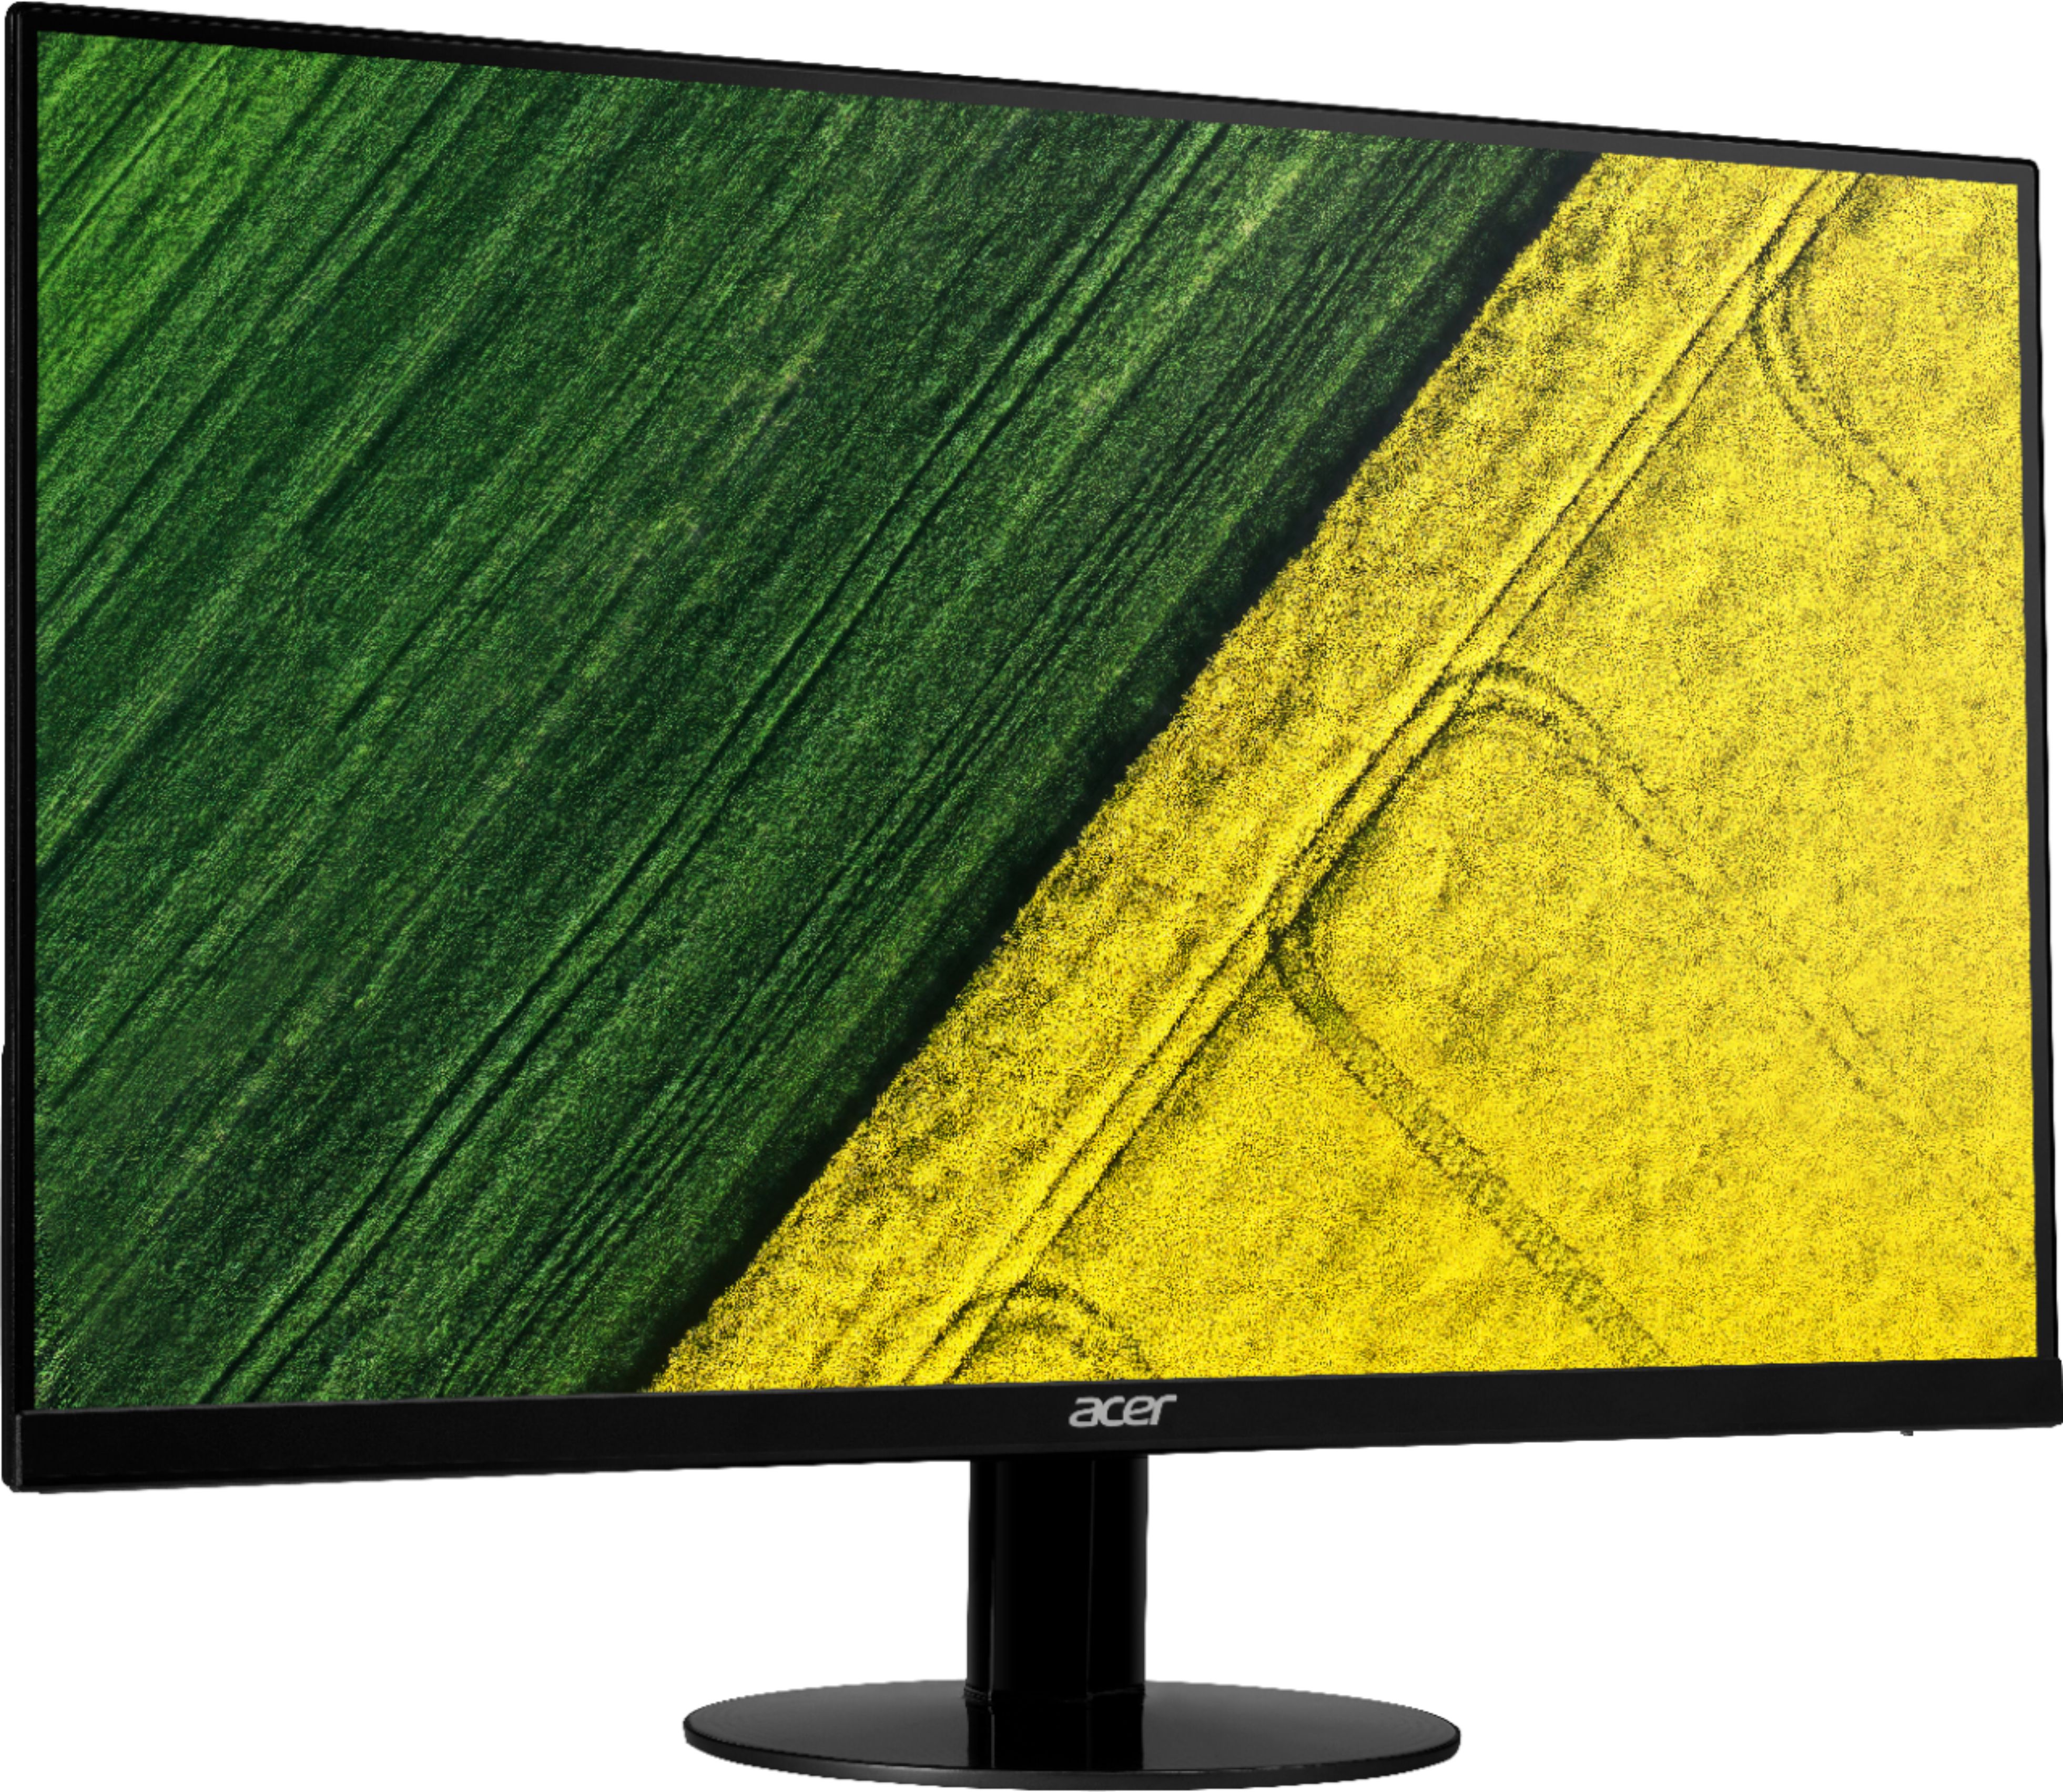 Angle View: Acer - 23.8" IPS LED FHD FreeSync Monitor (USB 3.1 Type-C, Display Port & HDMI)